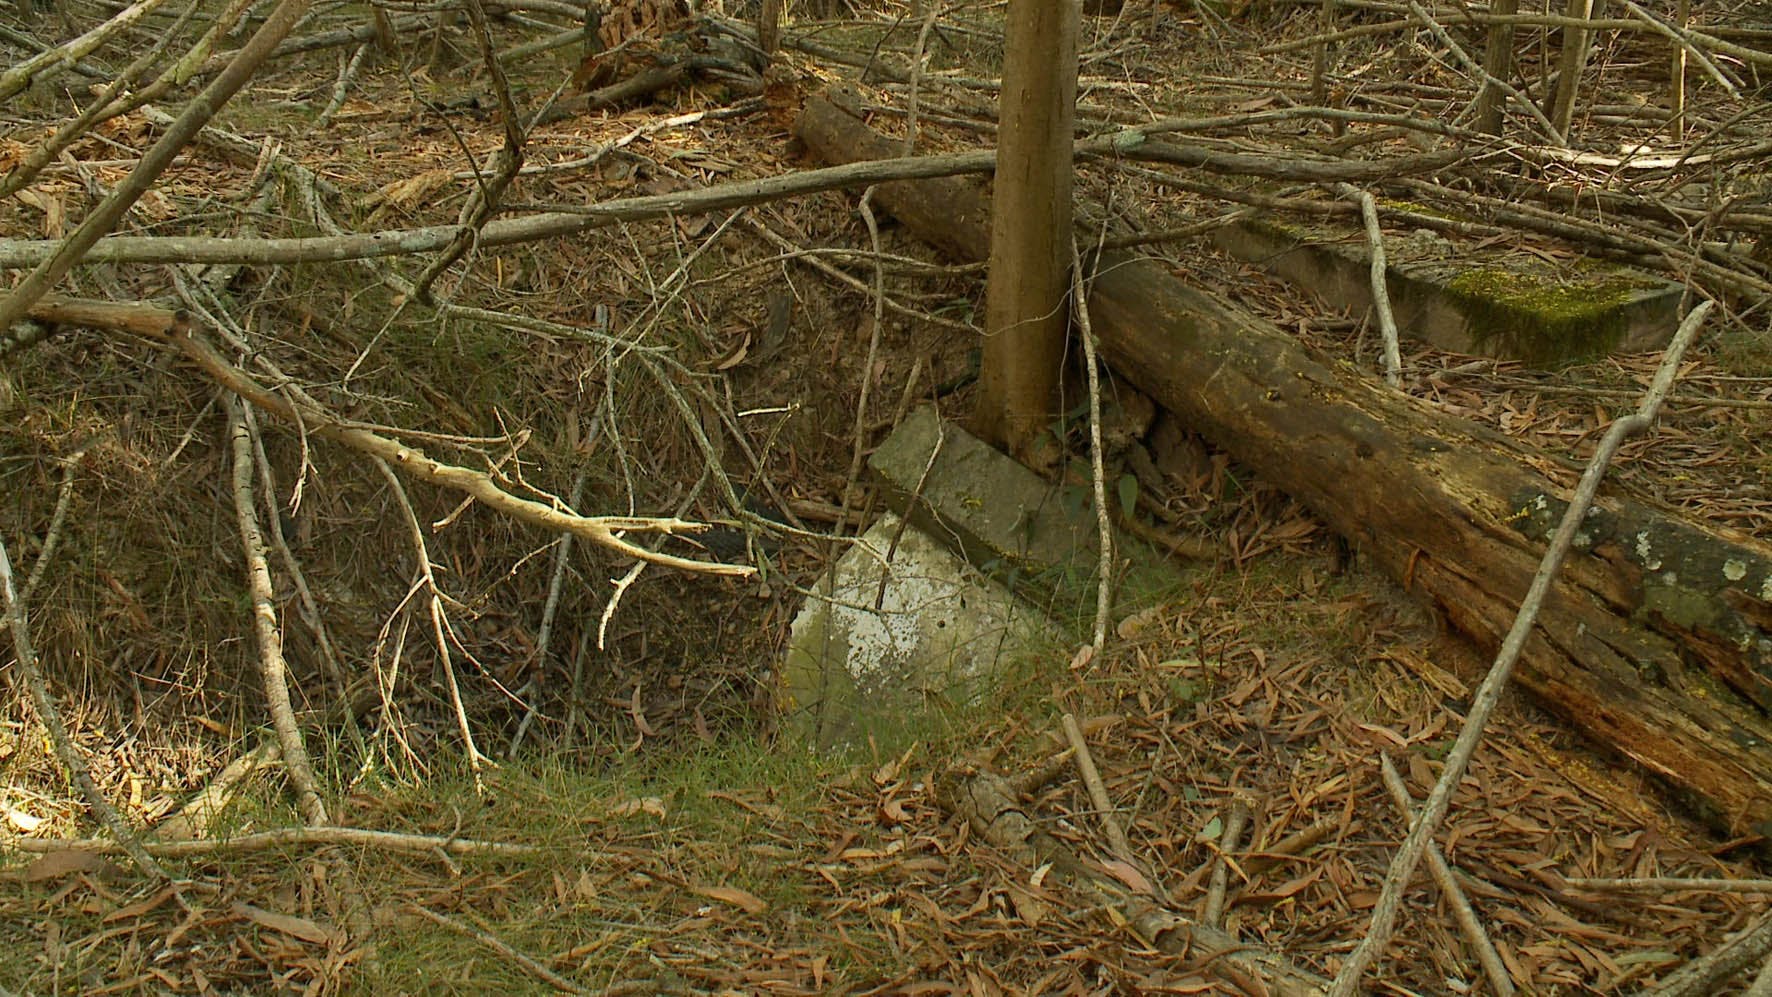 There are several sunken graves in the Cemetery